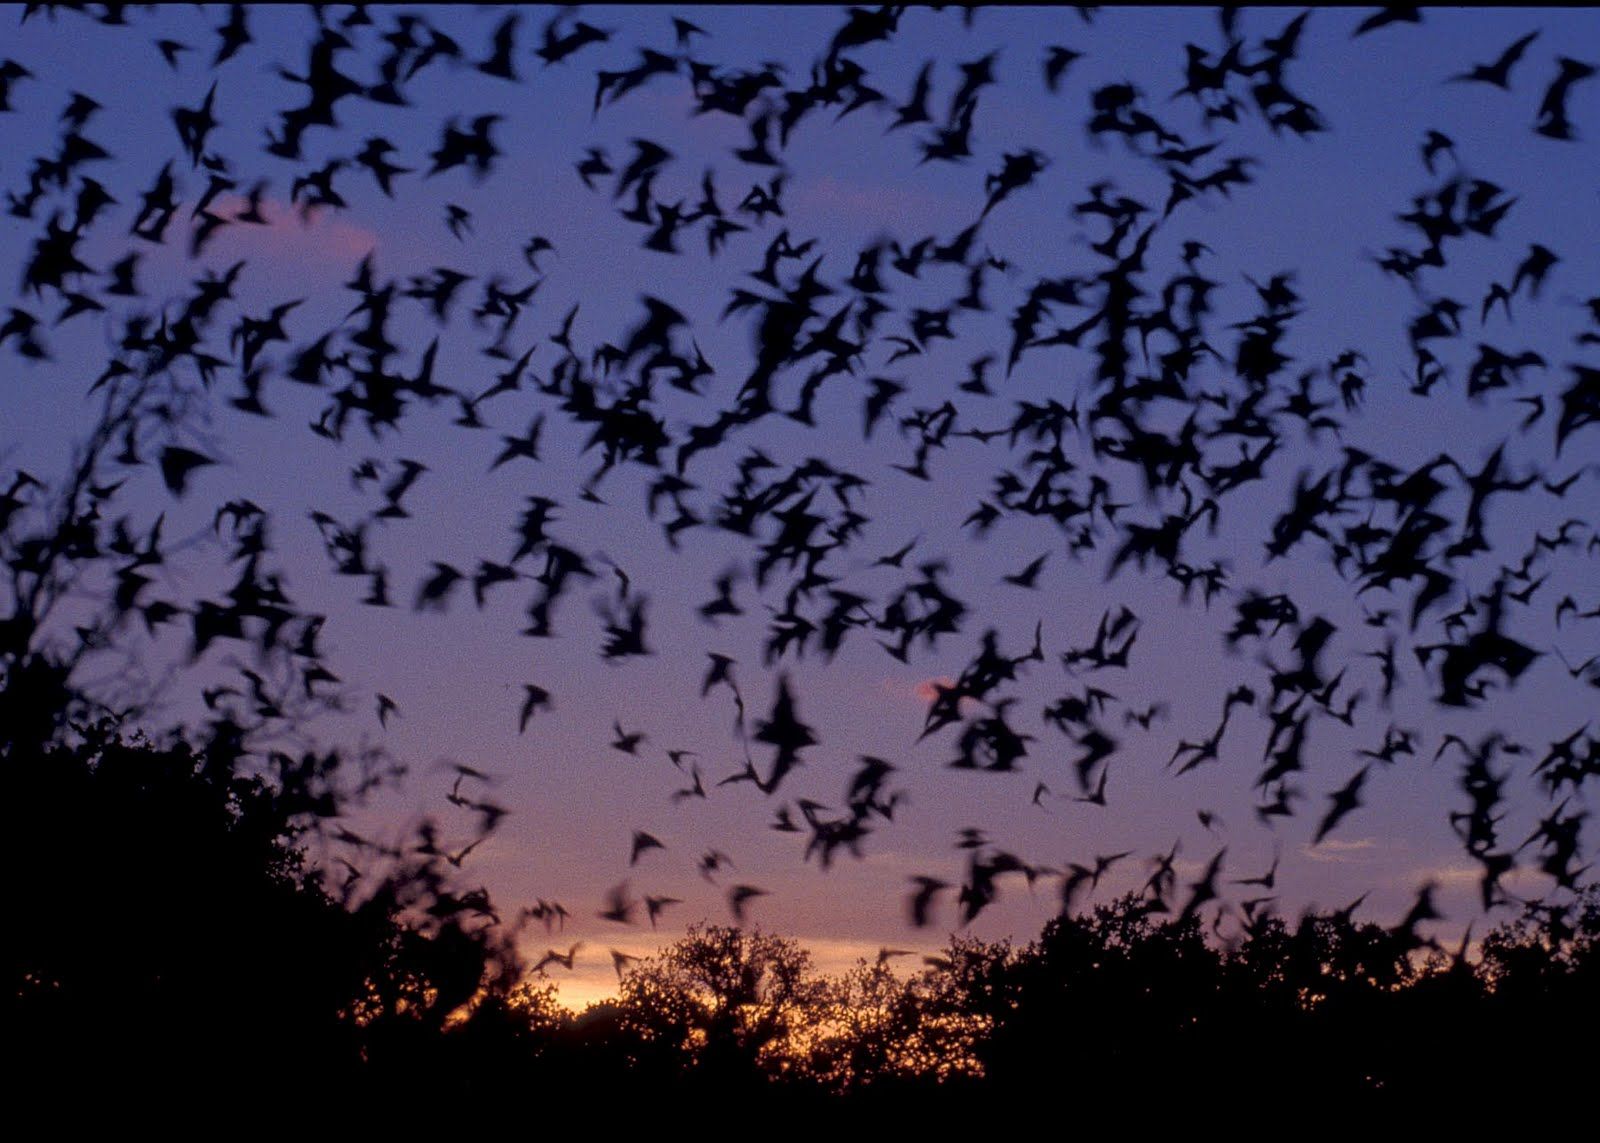 Bat Cave In Austin Nature & Cave Wallpaper HD Latest. Bat flying, Creatures of the night, Bat